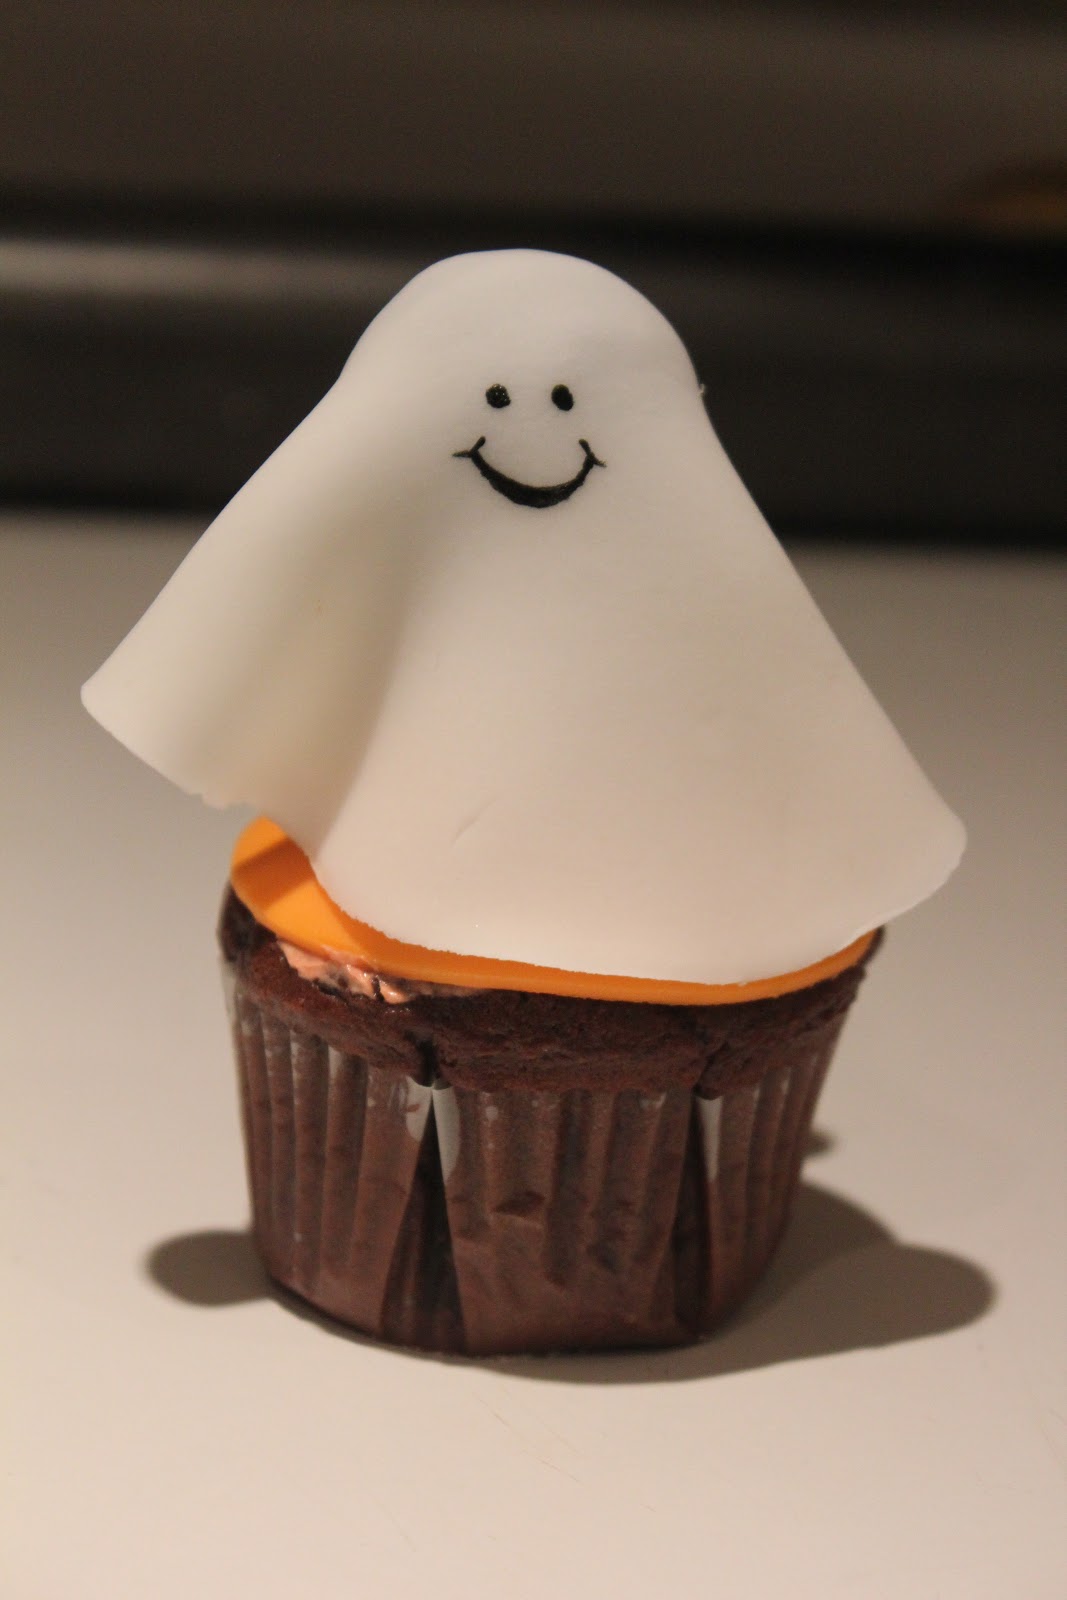 Near to Nothing: Cake Series: Ghost Cupcakes